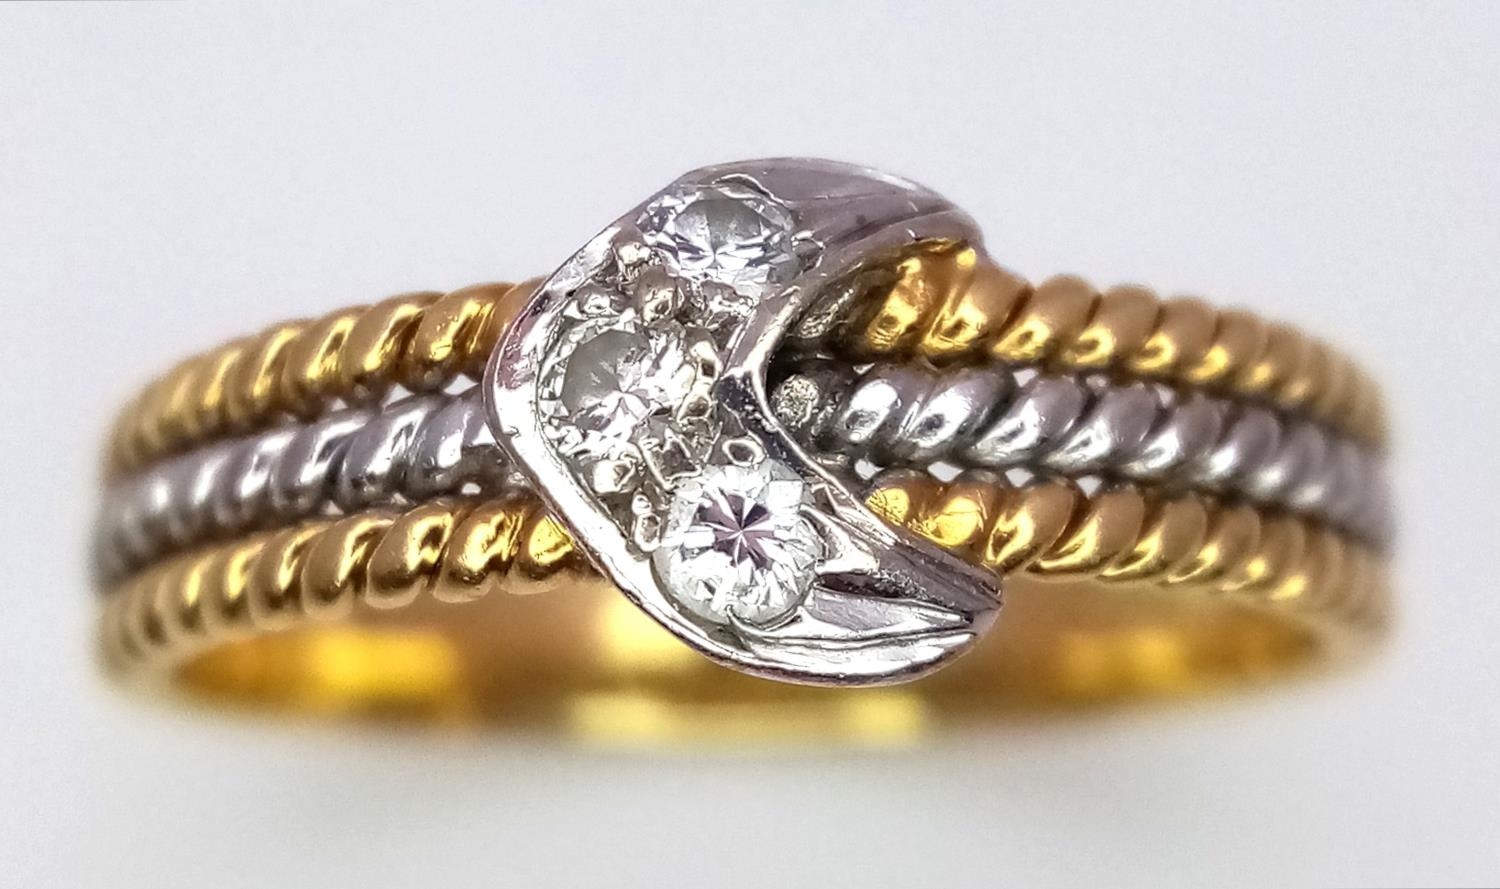 An 18K White and Yellow Gold, Diamond Crescent Ring. Size K. 2.85g total weight. - Image 3 of 5